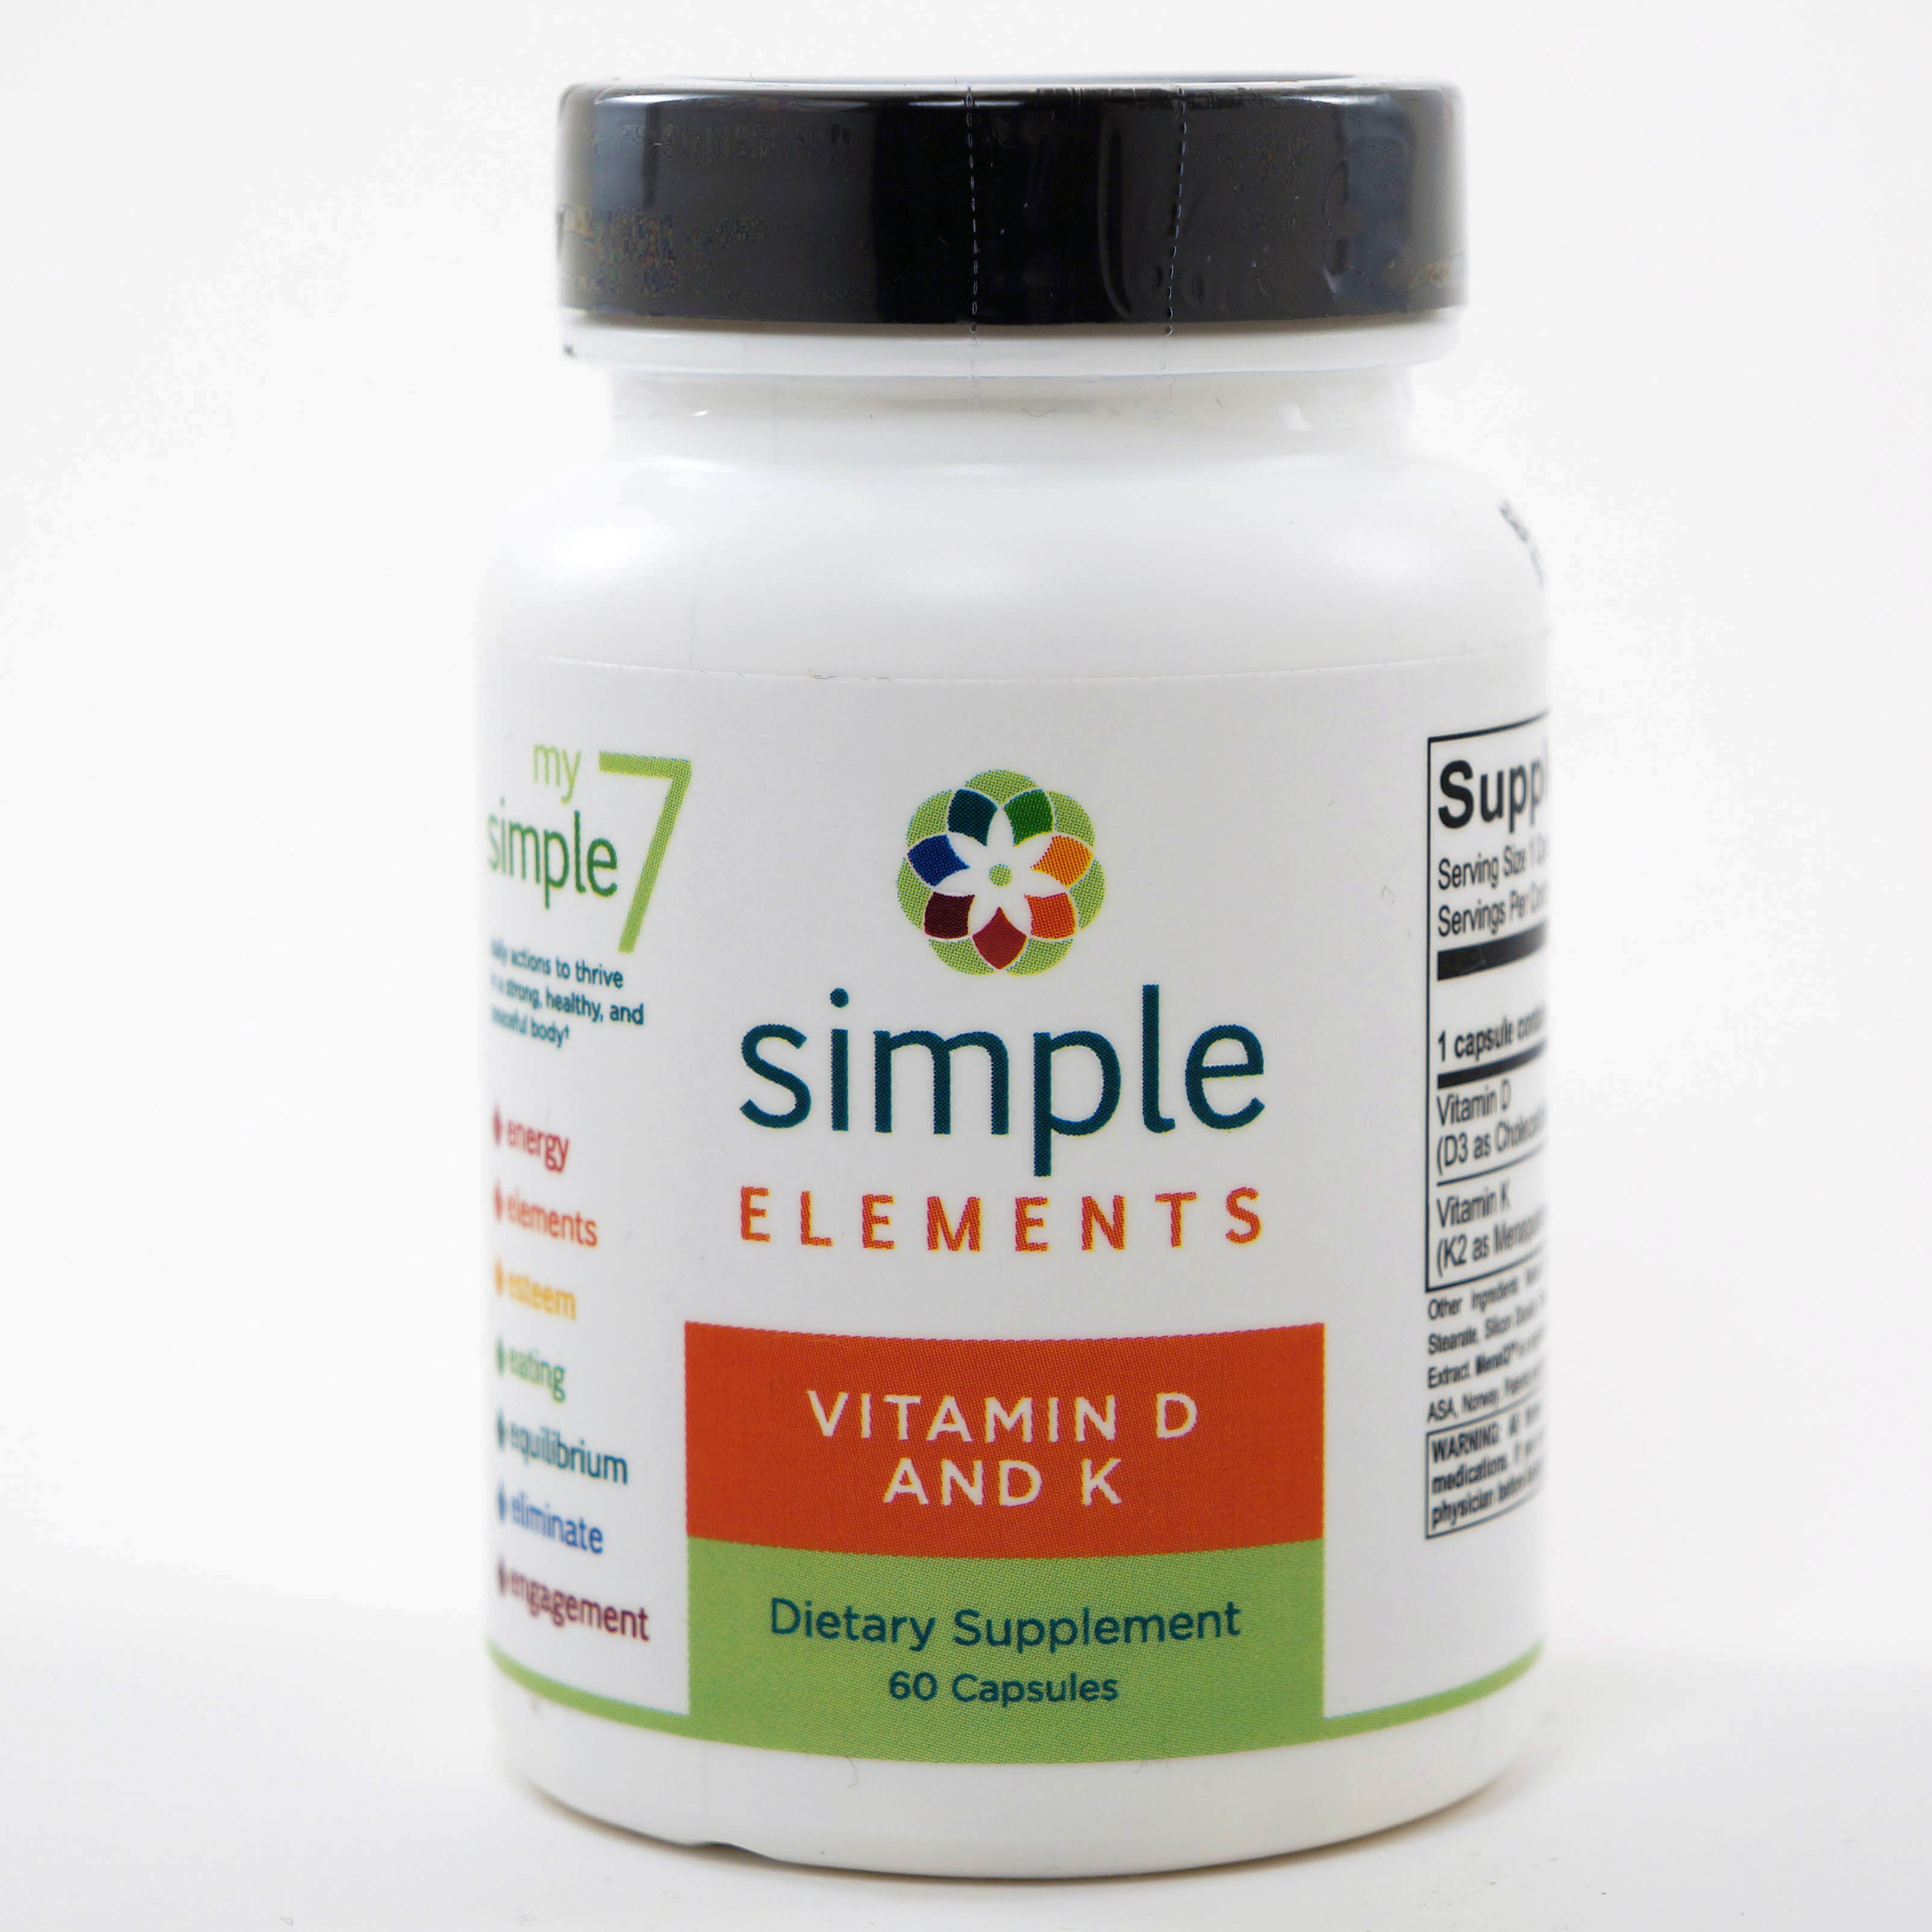 Vitamin D and K Dr. Durland's Simple Wellness Wellness made SIMPLE.